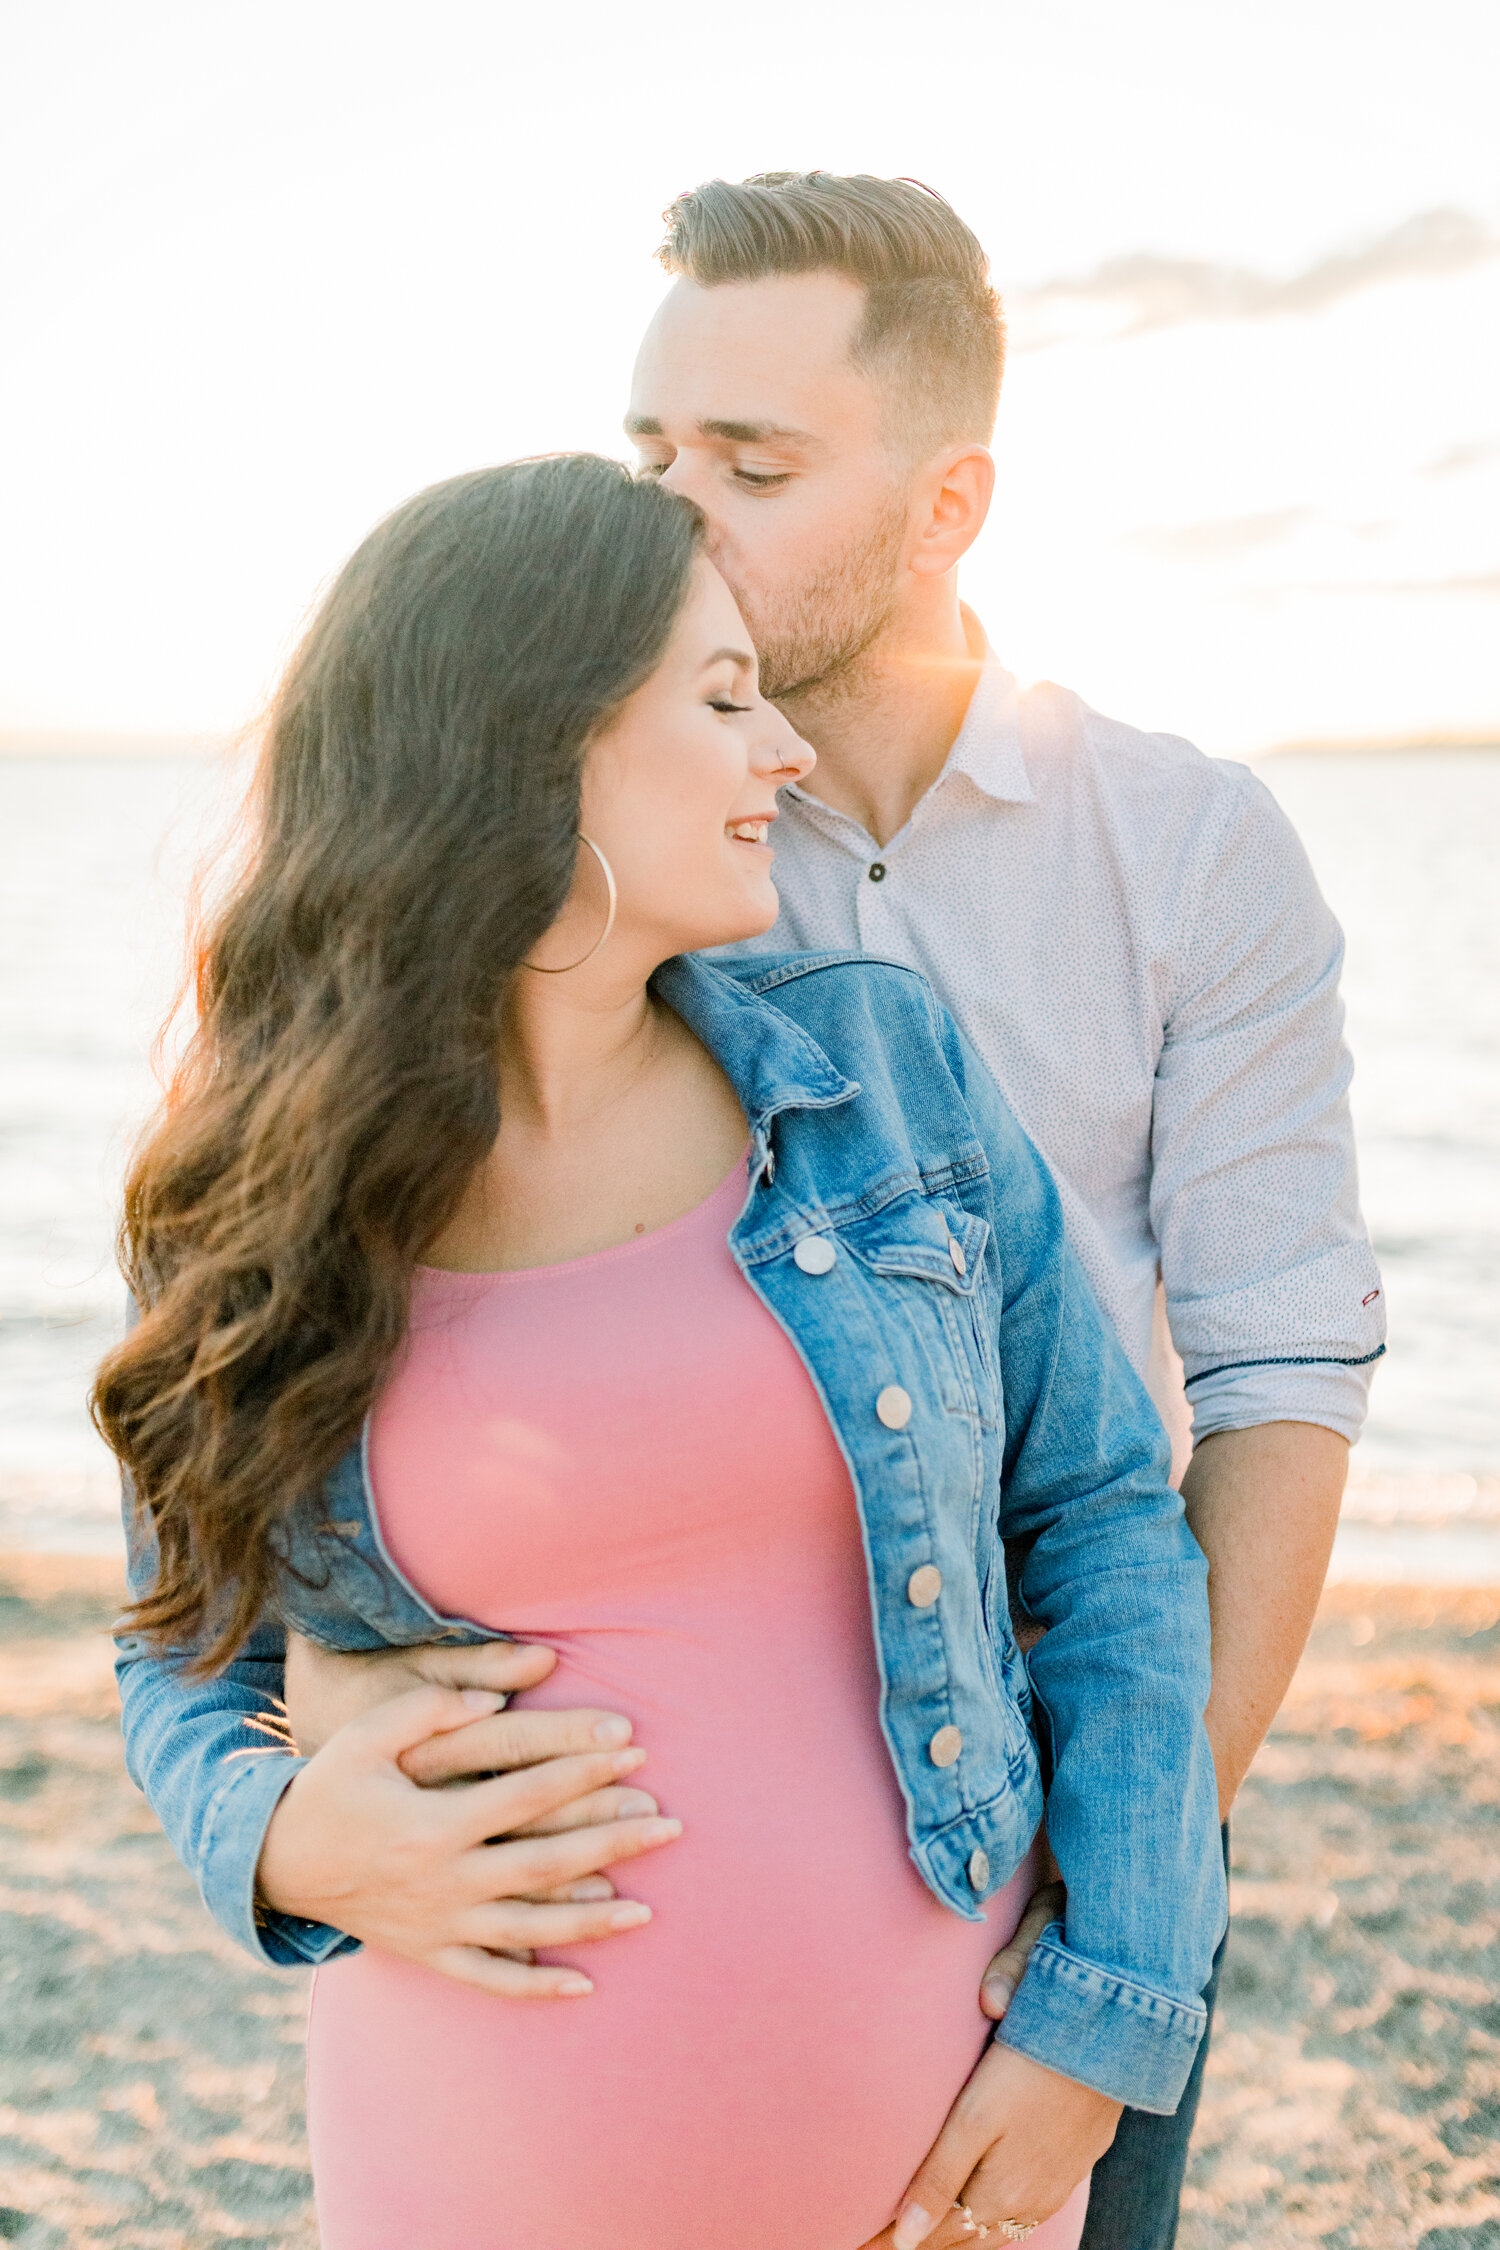  Hugging her from behind, this expectant father tenderly embraces his pregnant wife during this maternity session by Chelsea Mason Photography in Ontario, Canada. pink and denim colored family photos, long medium brown colored waved hair, womens deni